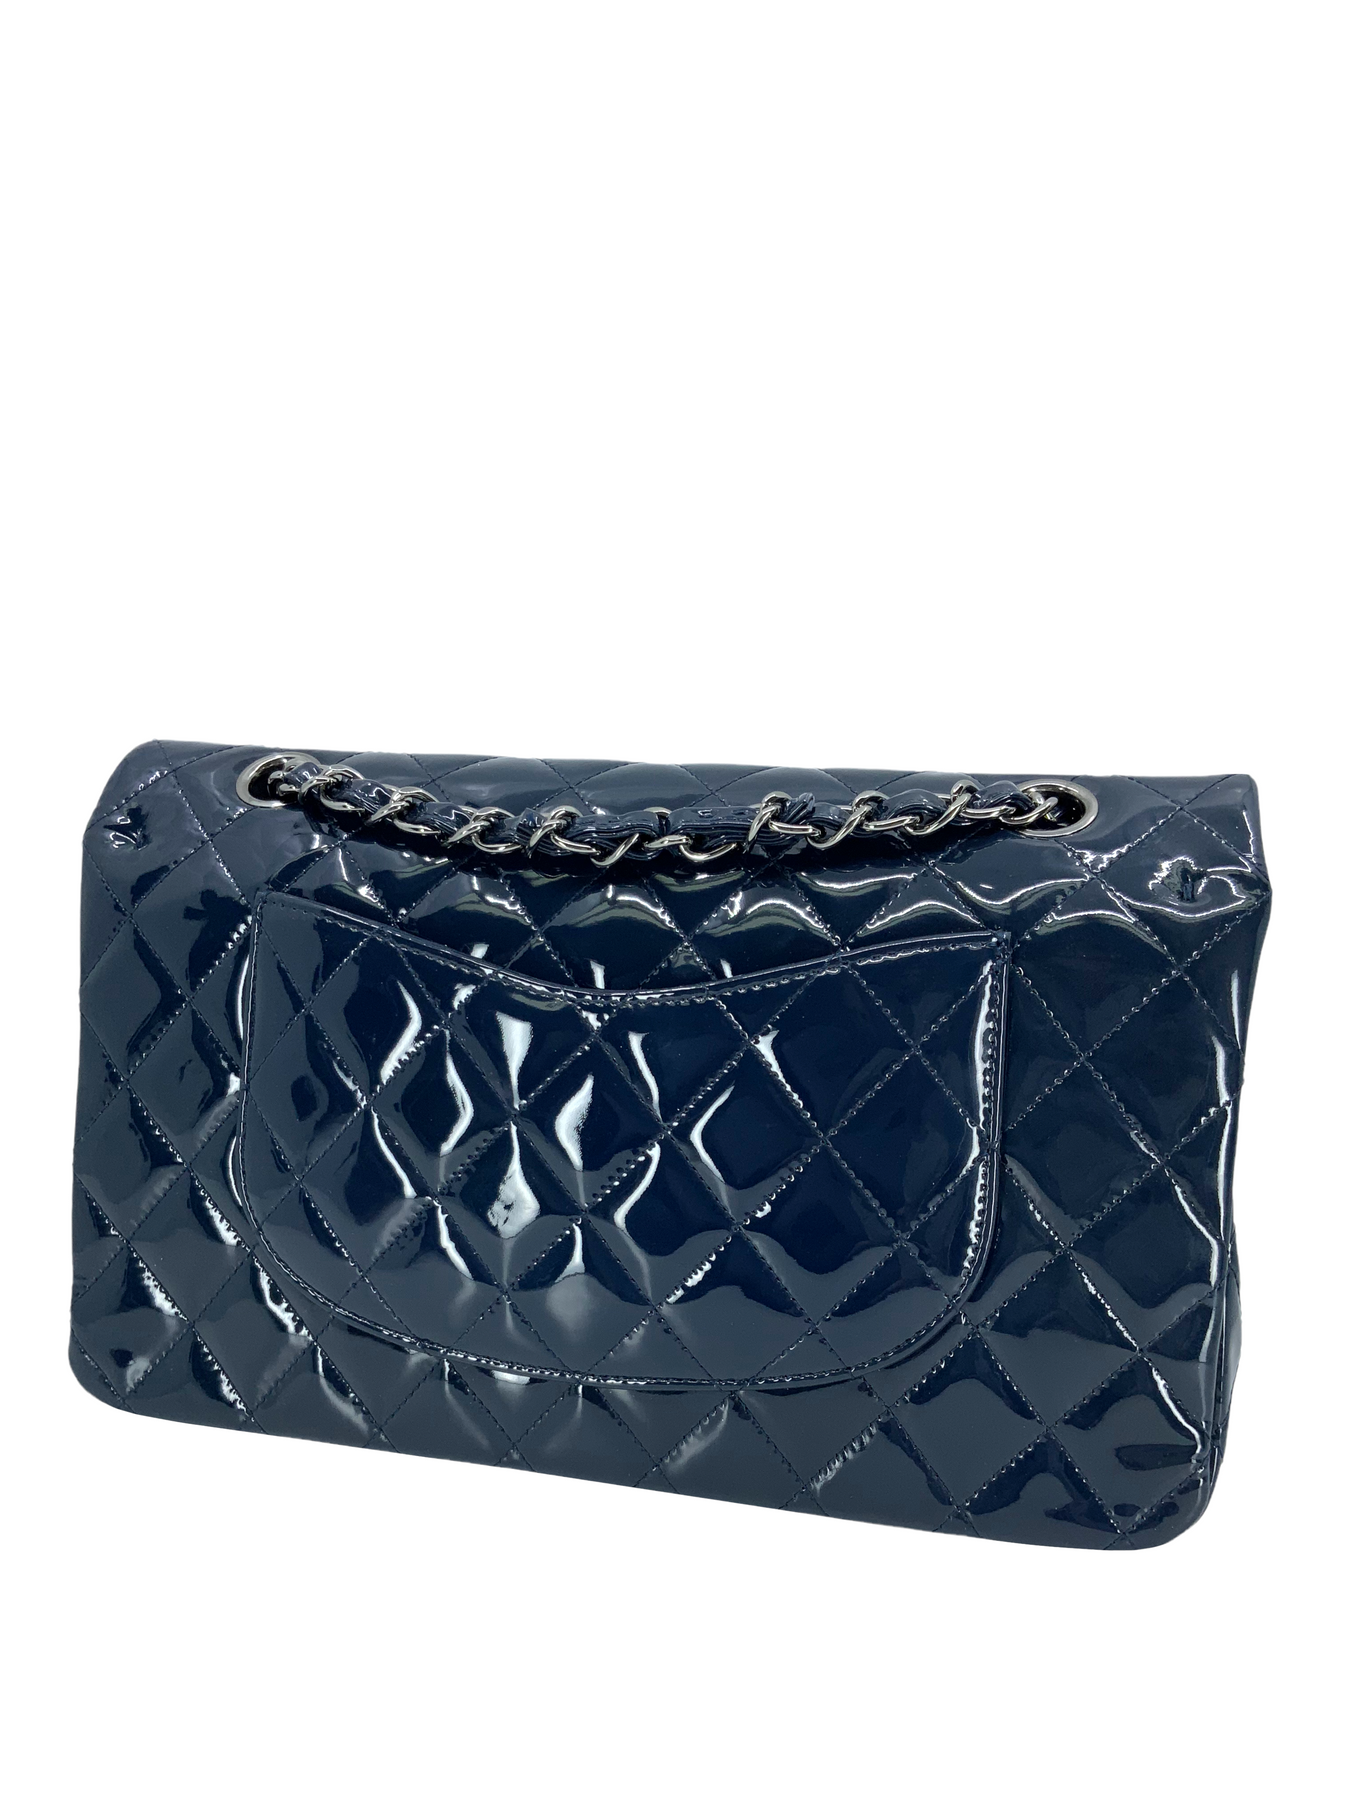 Chanel Quilted Patent Leather Classic Medium Double Flap Bag